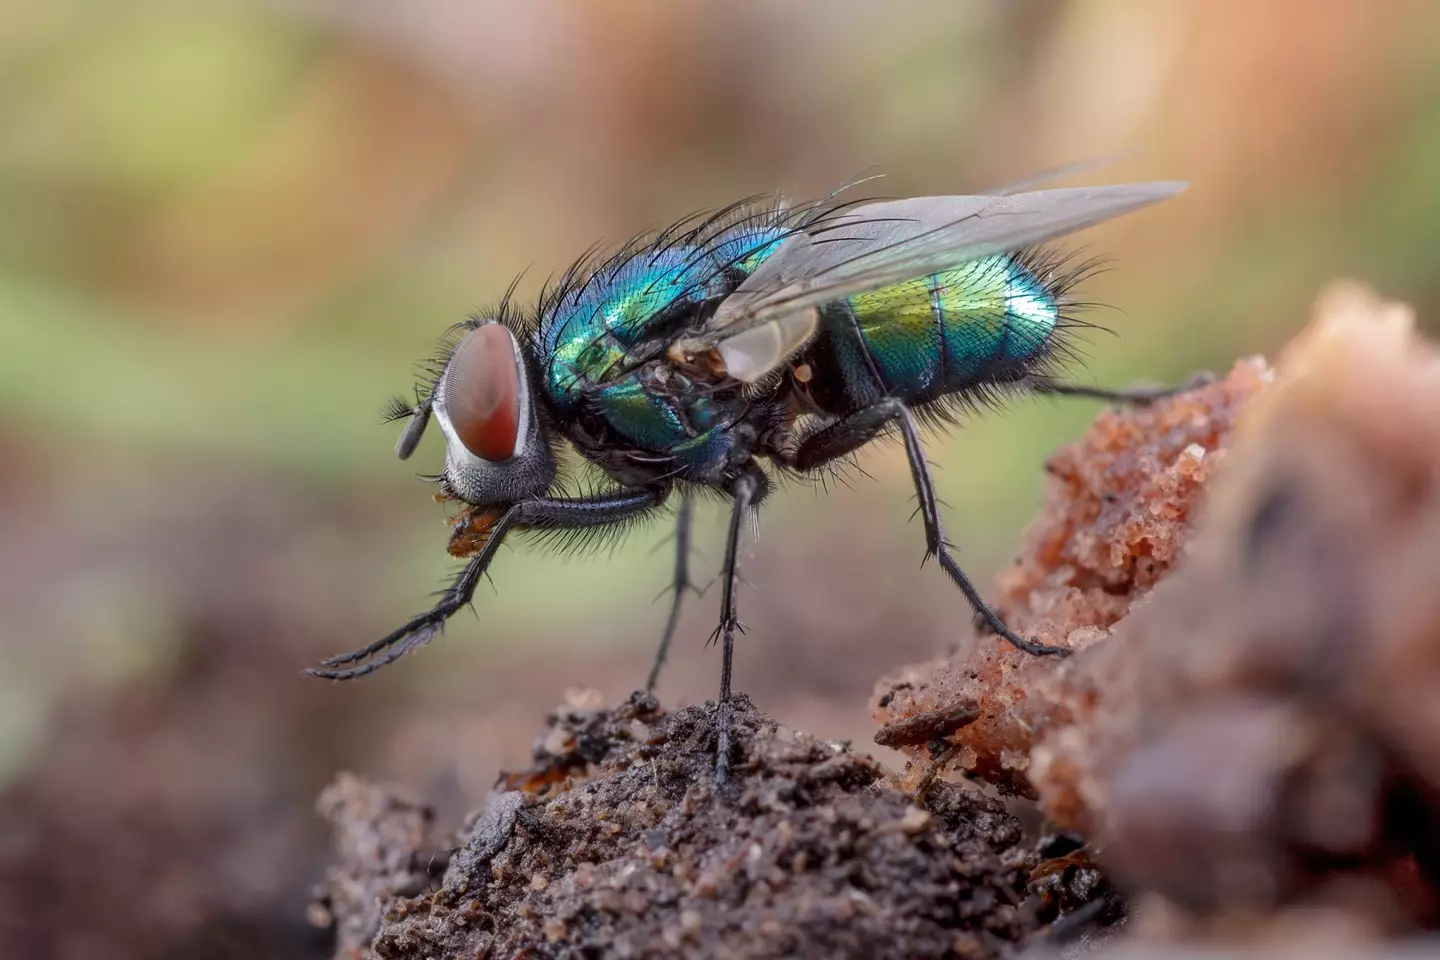 Houseflies will plant their eggs in food and maggots can hatch in as few as 24 hours. (Getty Images)